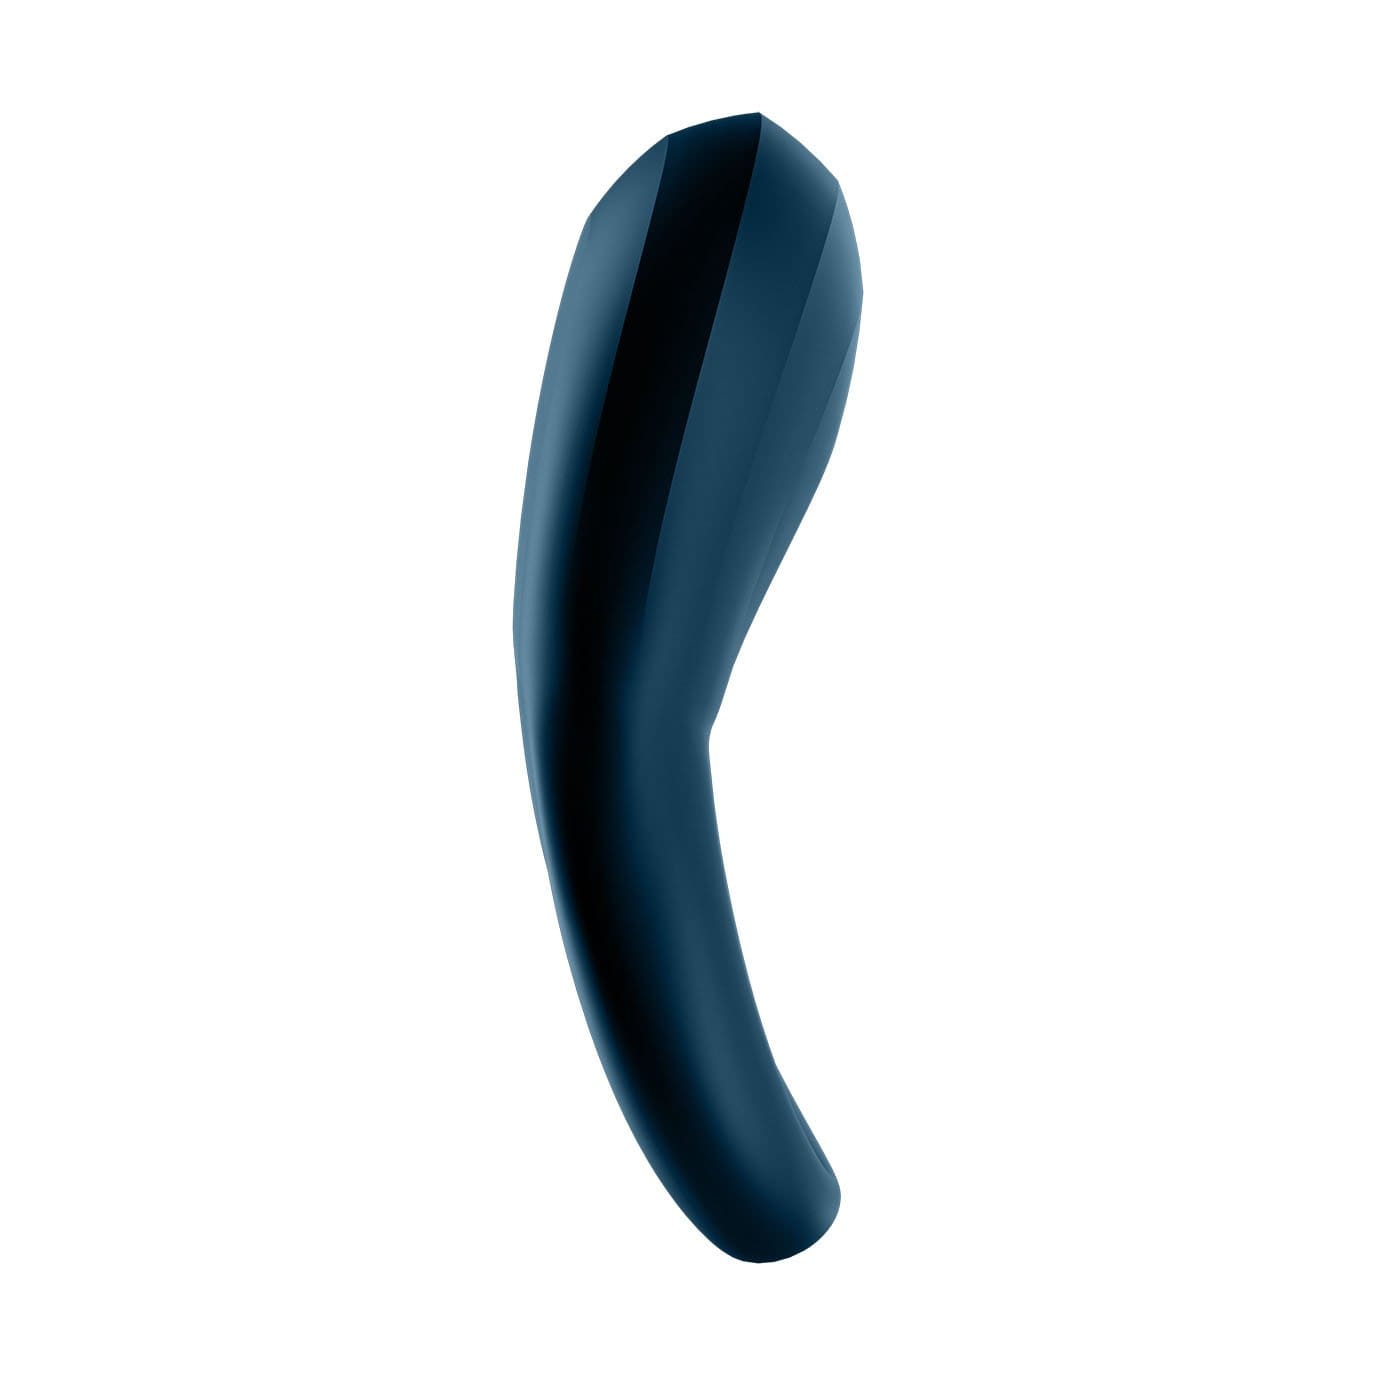 Satisfyer - Epic Duo Bluetooth App-Controlled Silicone Vibrating Cock Ring (Black) Silicone Cock Ring (Vibration) Rechargeable 4061504009940 CherryAffairs